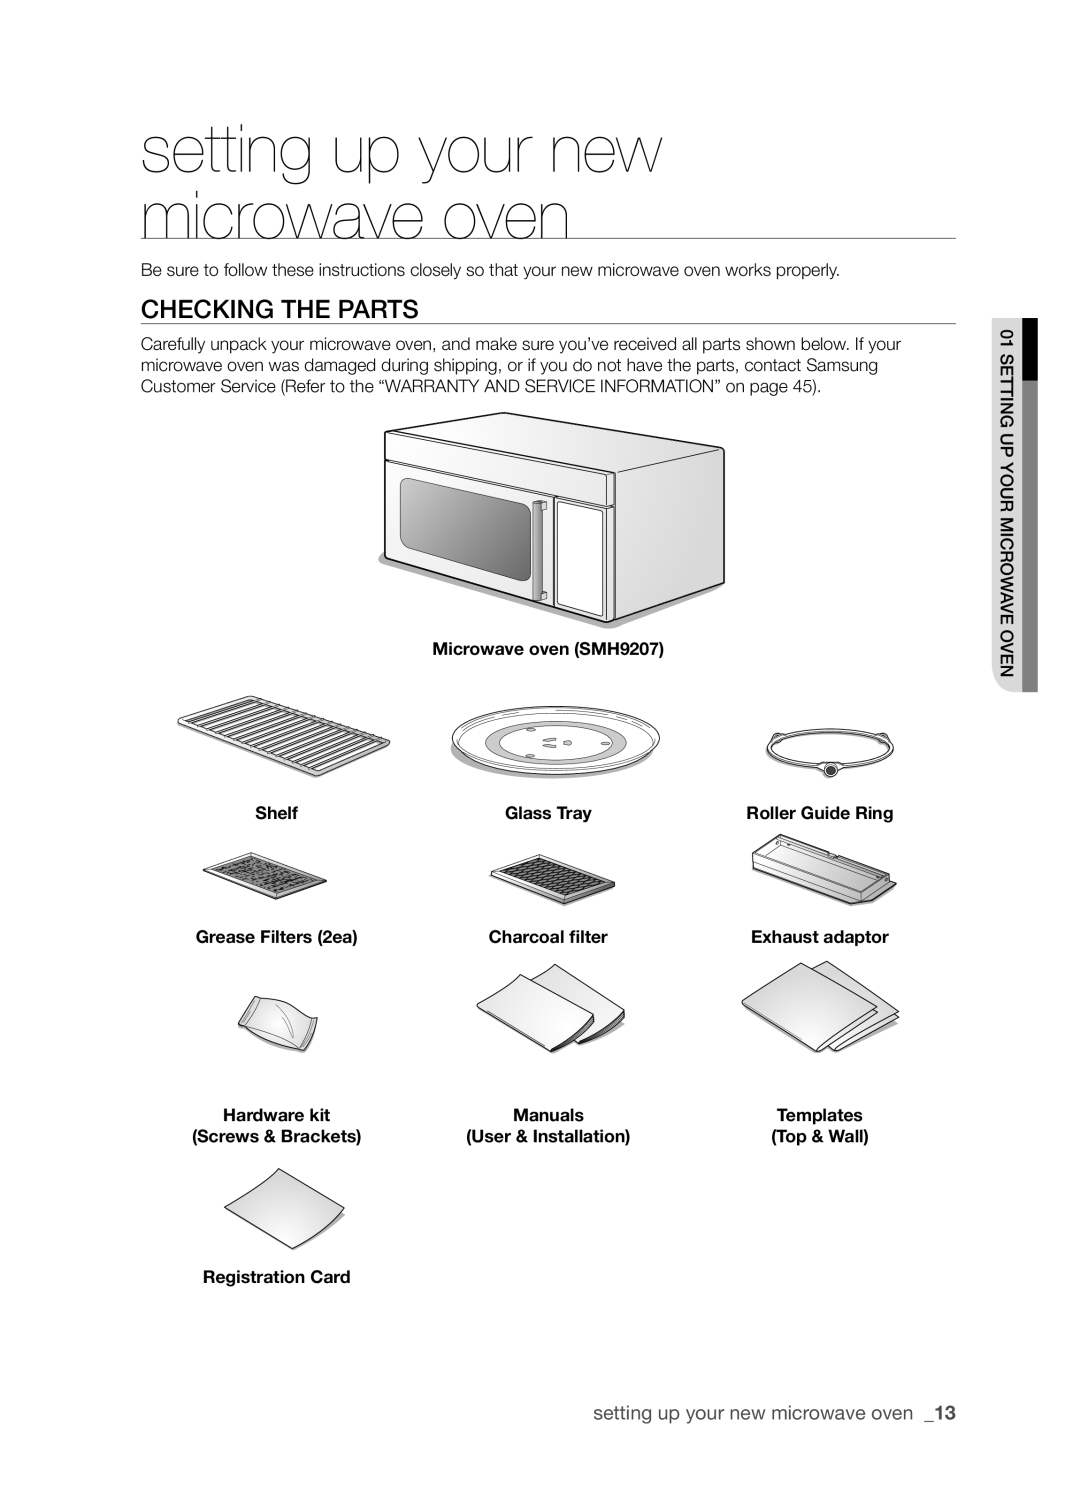 Samsung SMH9207ST user manual setting up your new microwave oven, Checking The Parts 